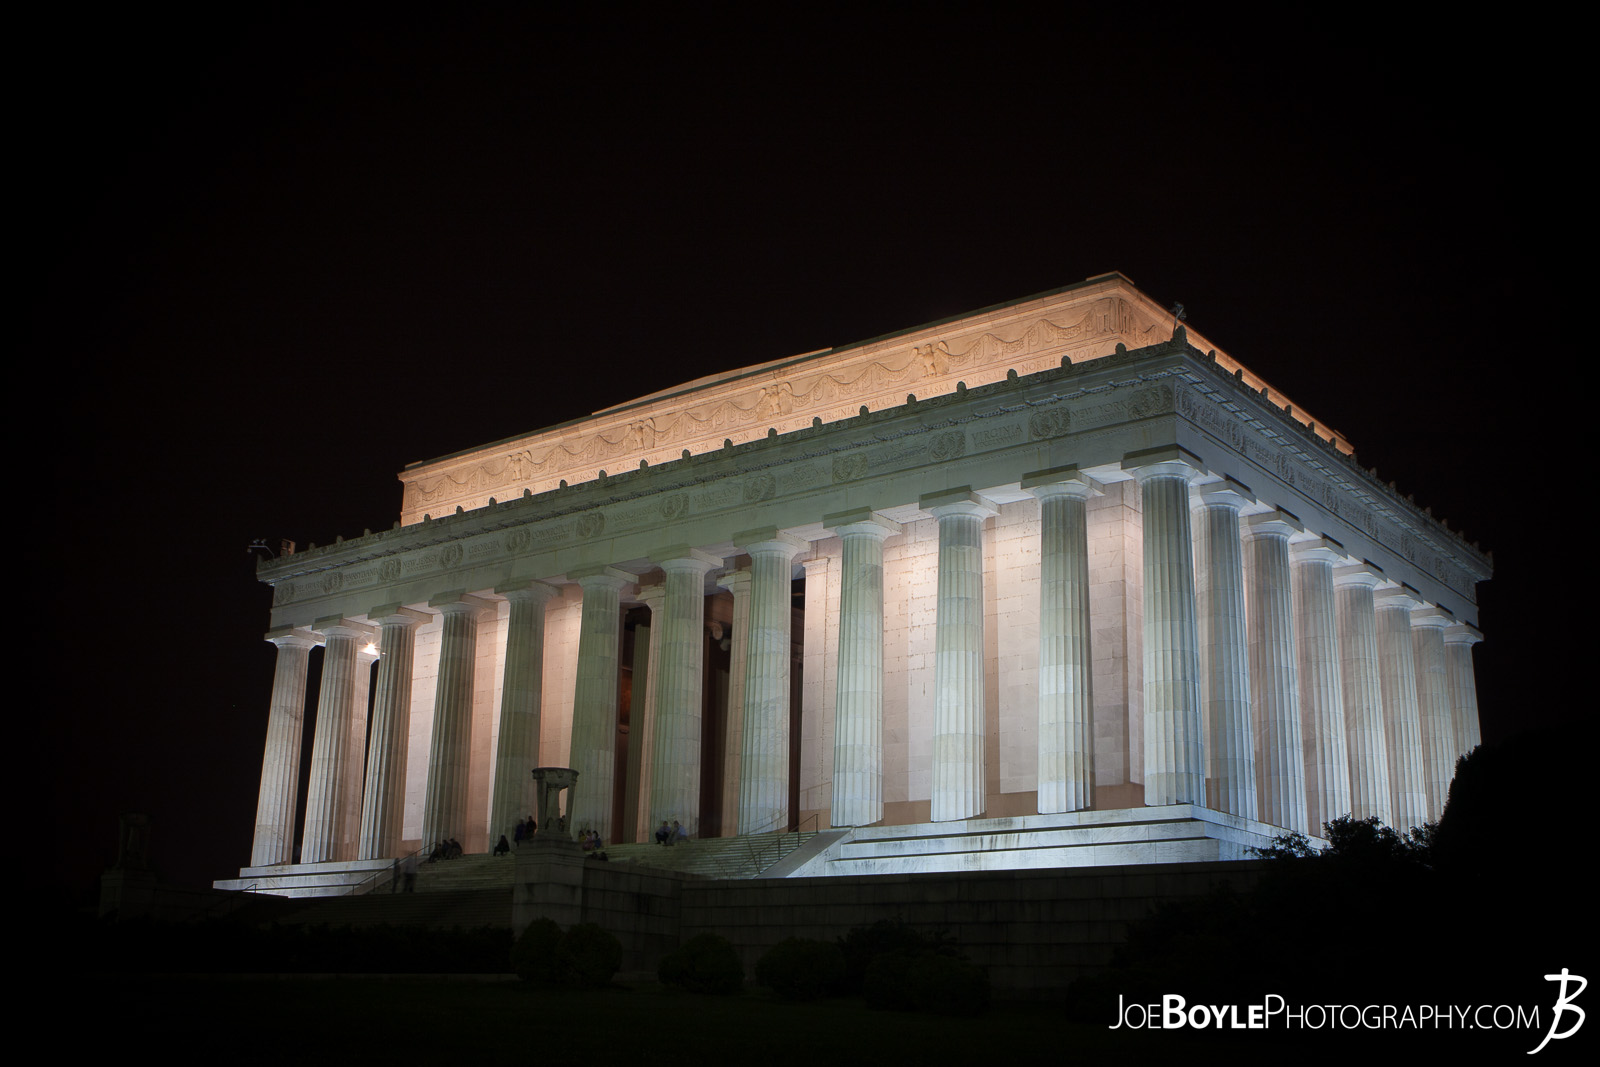  While I was in Washington, DC I was able to take some great night images of a few of the iconic landmarks that make up this city! Here is an image of the Lincoln Memorial! 